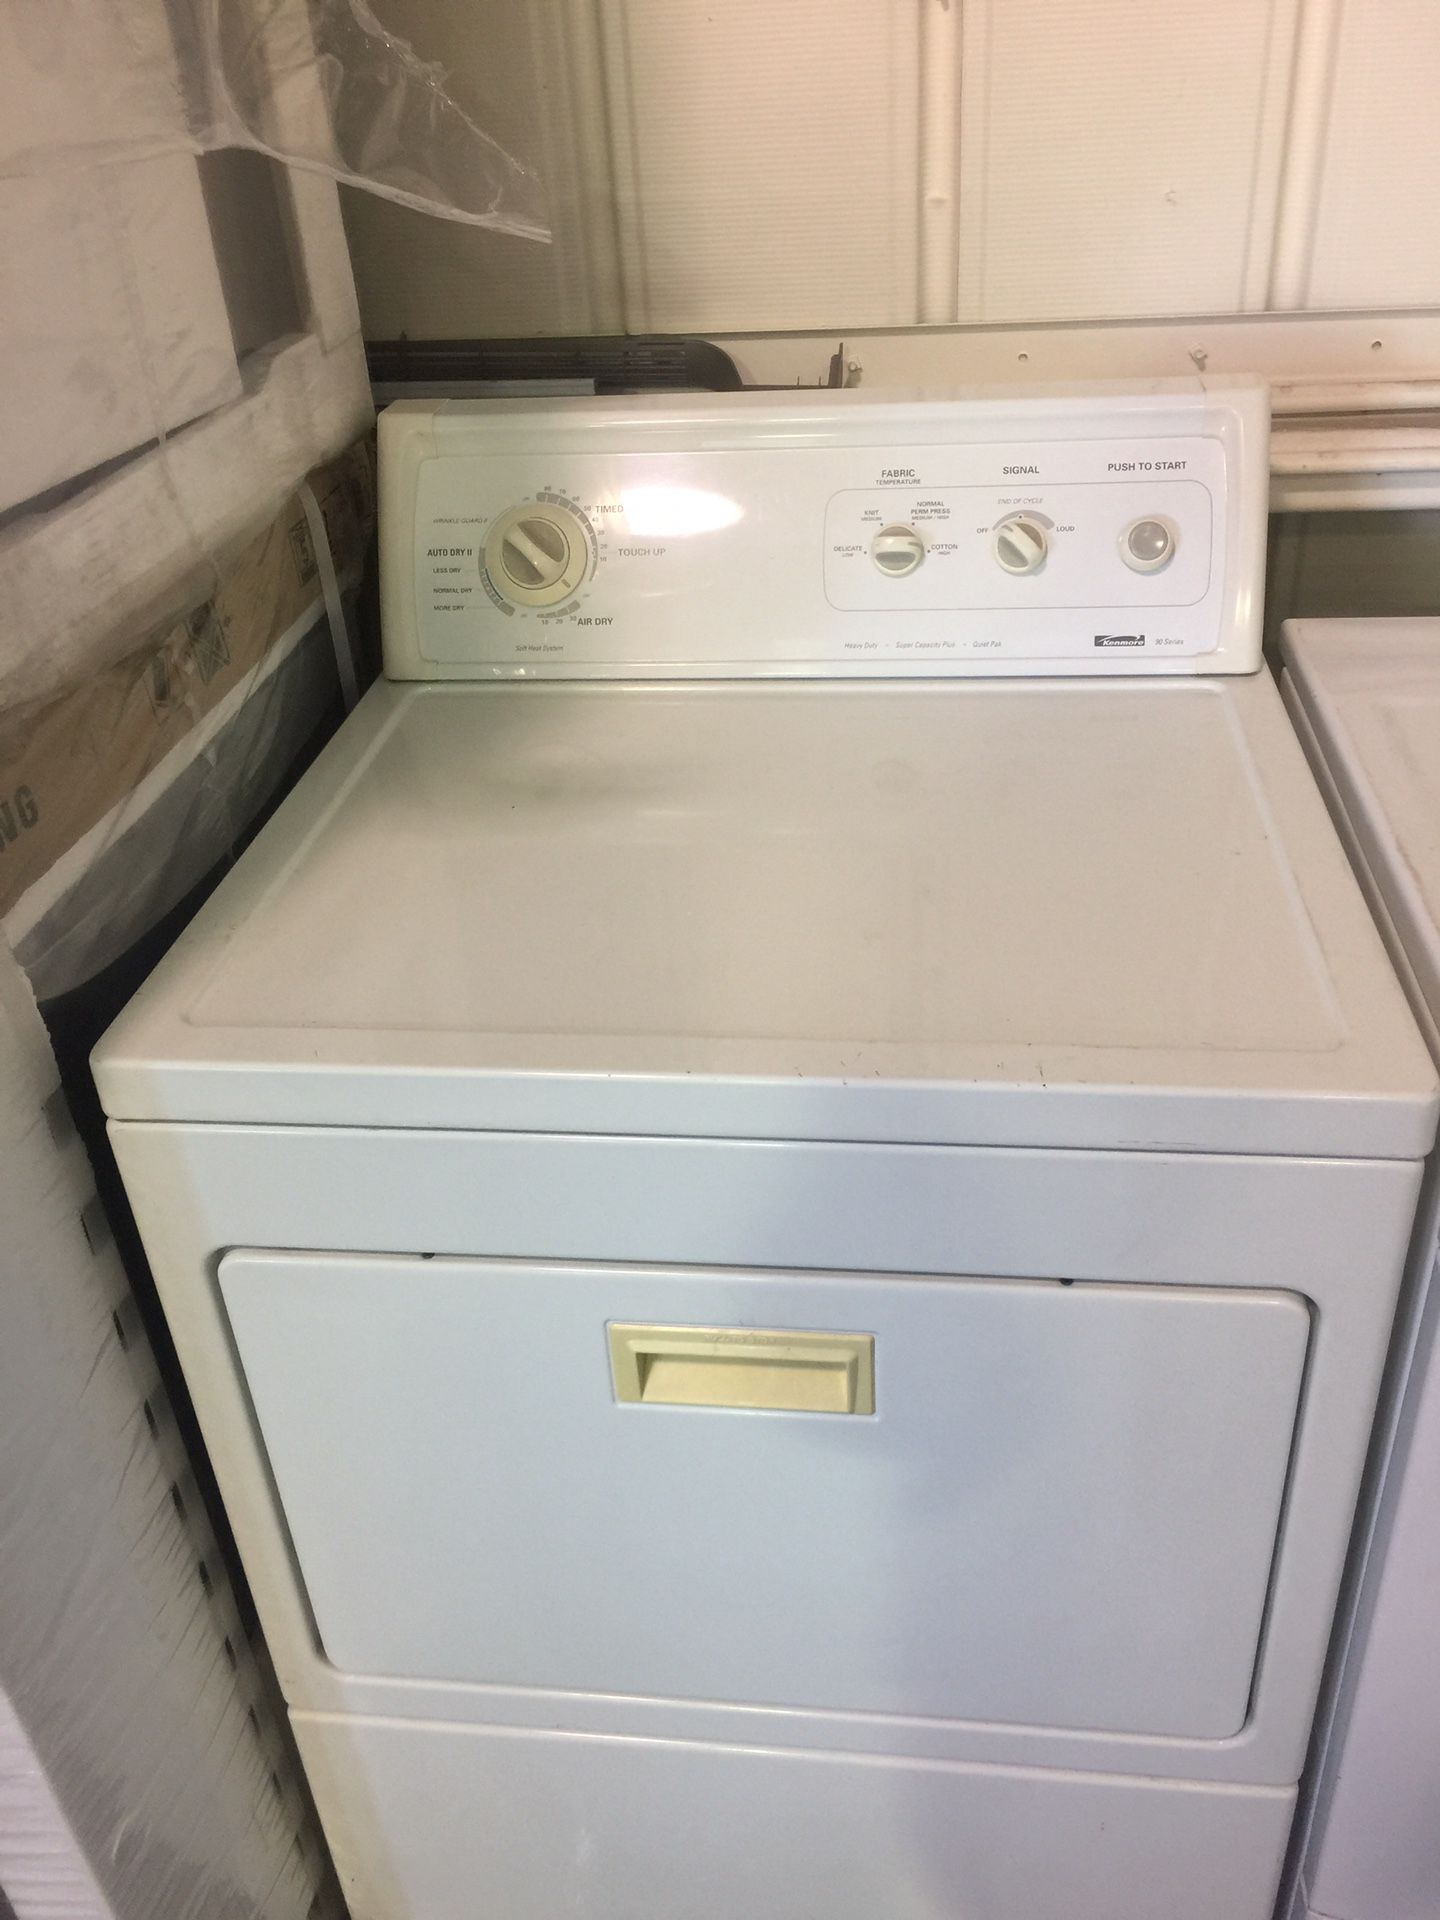 Mix and match washers and dryers